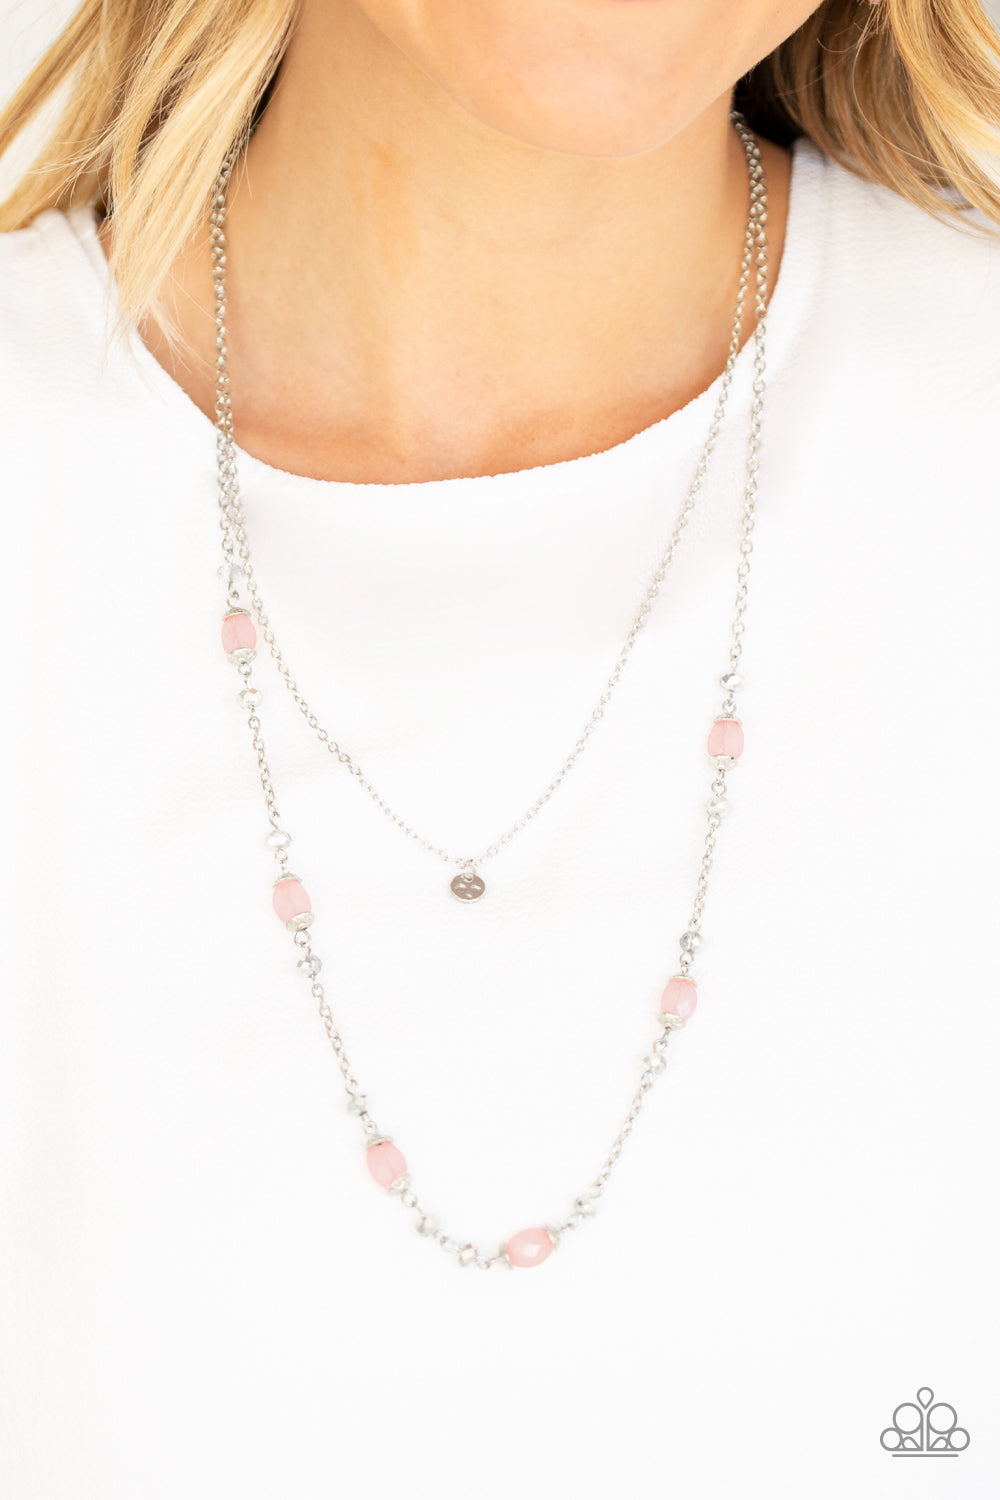 Irresistibly Iridescent Pink Necklace Paparazzi Accessories